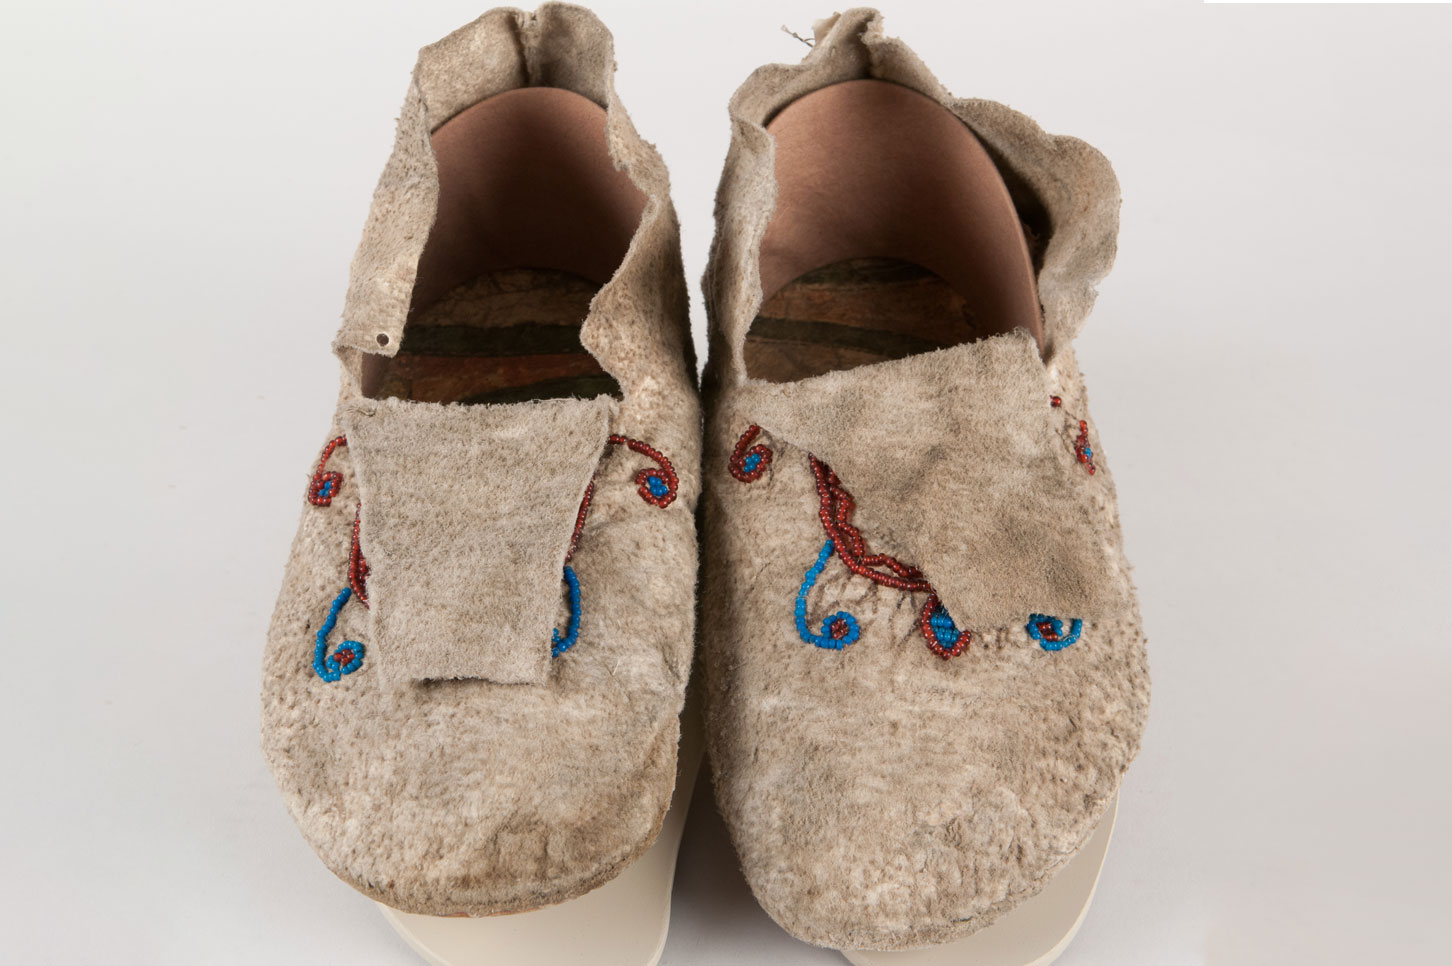 Two piece moccasins, constructed utilizing rawhide cut from a 'isaap'tekey or parfleche for the soles. The uppers being made made from deer hide, originally the summer hides or 'red hides' were favored for constructing moccasins, because the ticks on the deer were believed to make the hide more durable. 